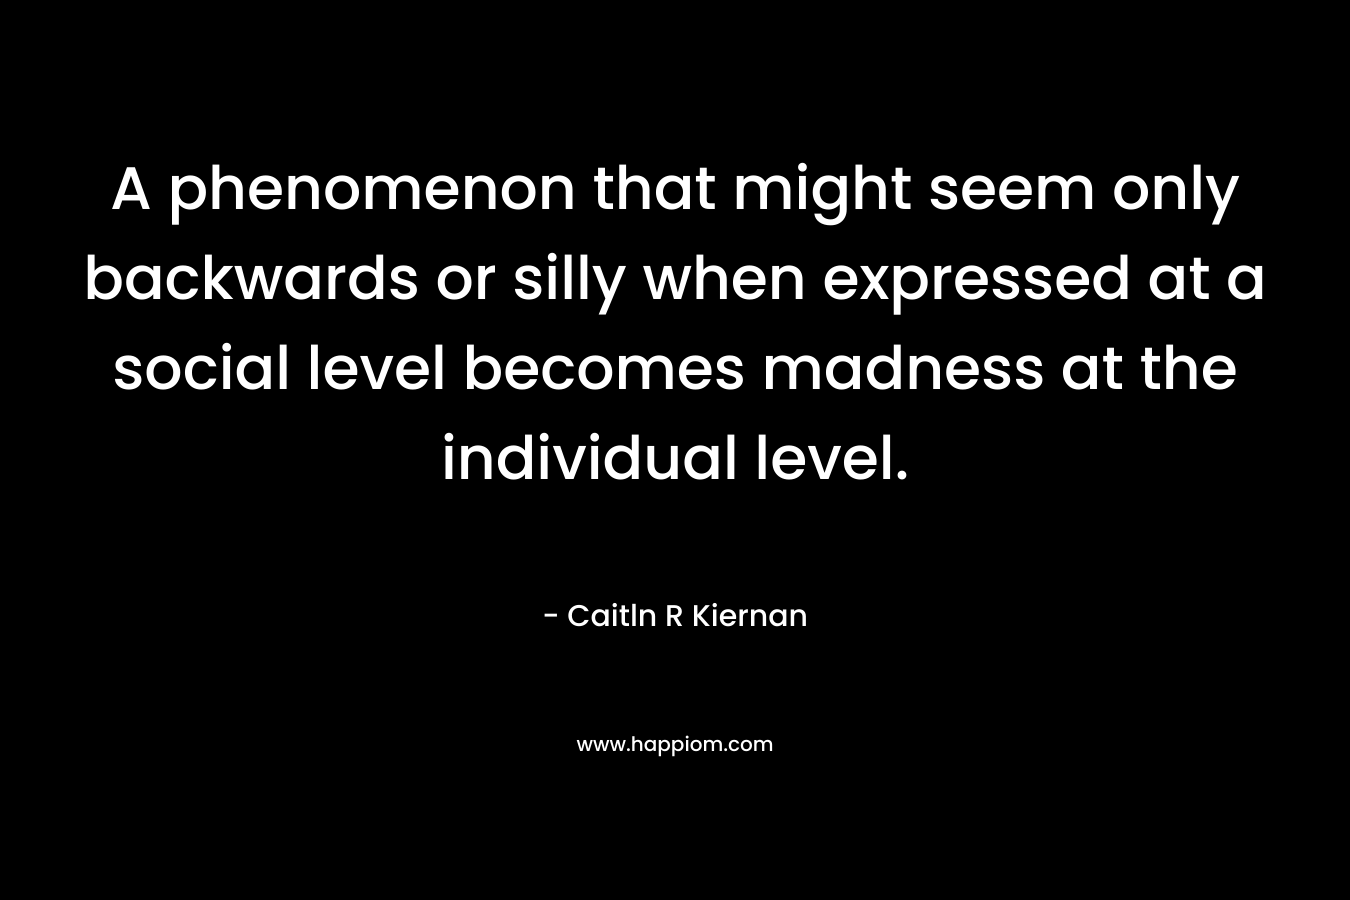 A phenomenon that might seem only backwards or silly when expressed at a social level becomes madness at the individual level.